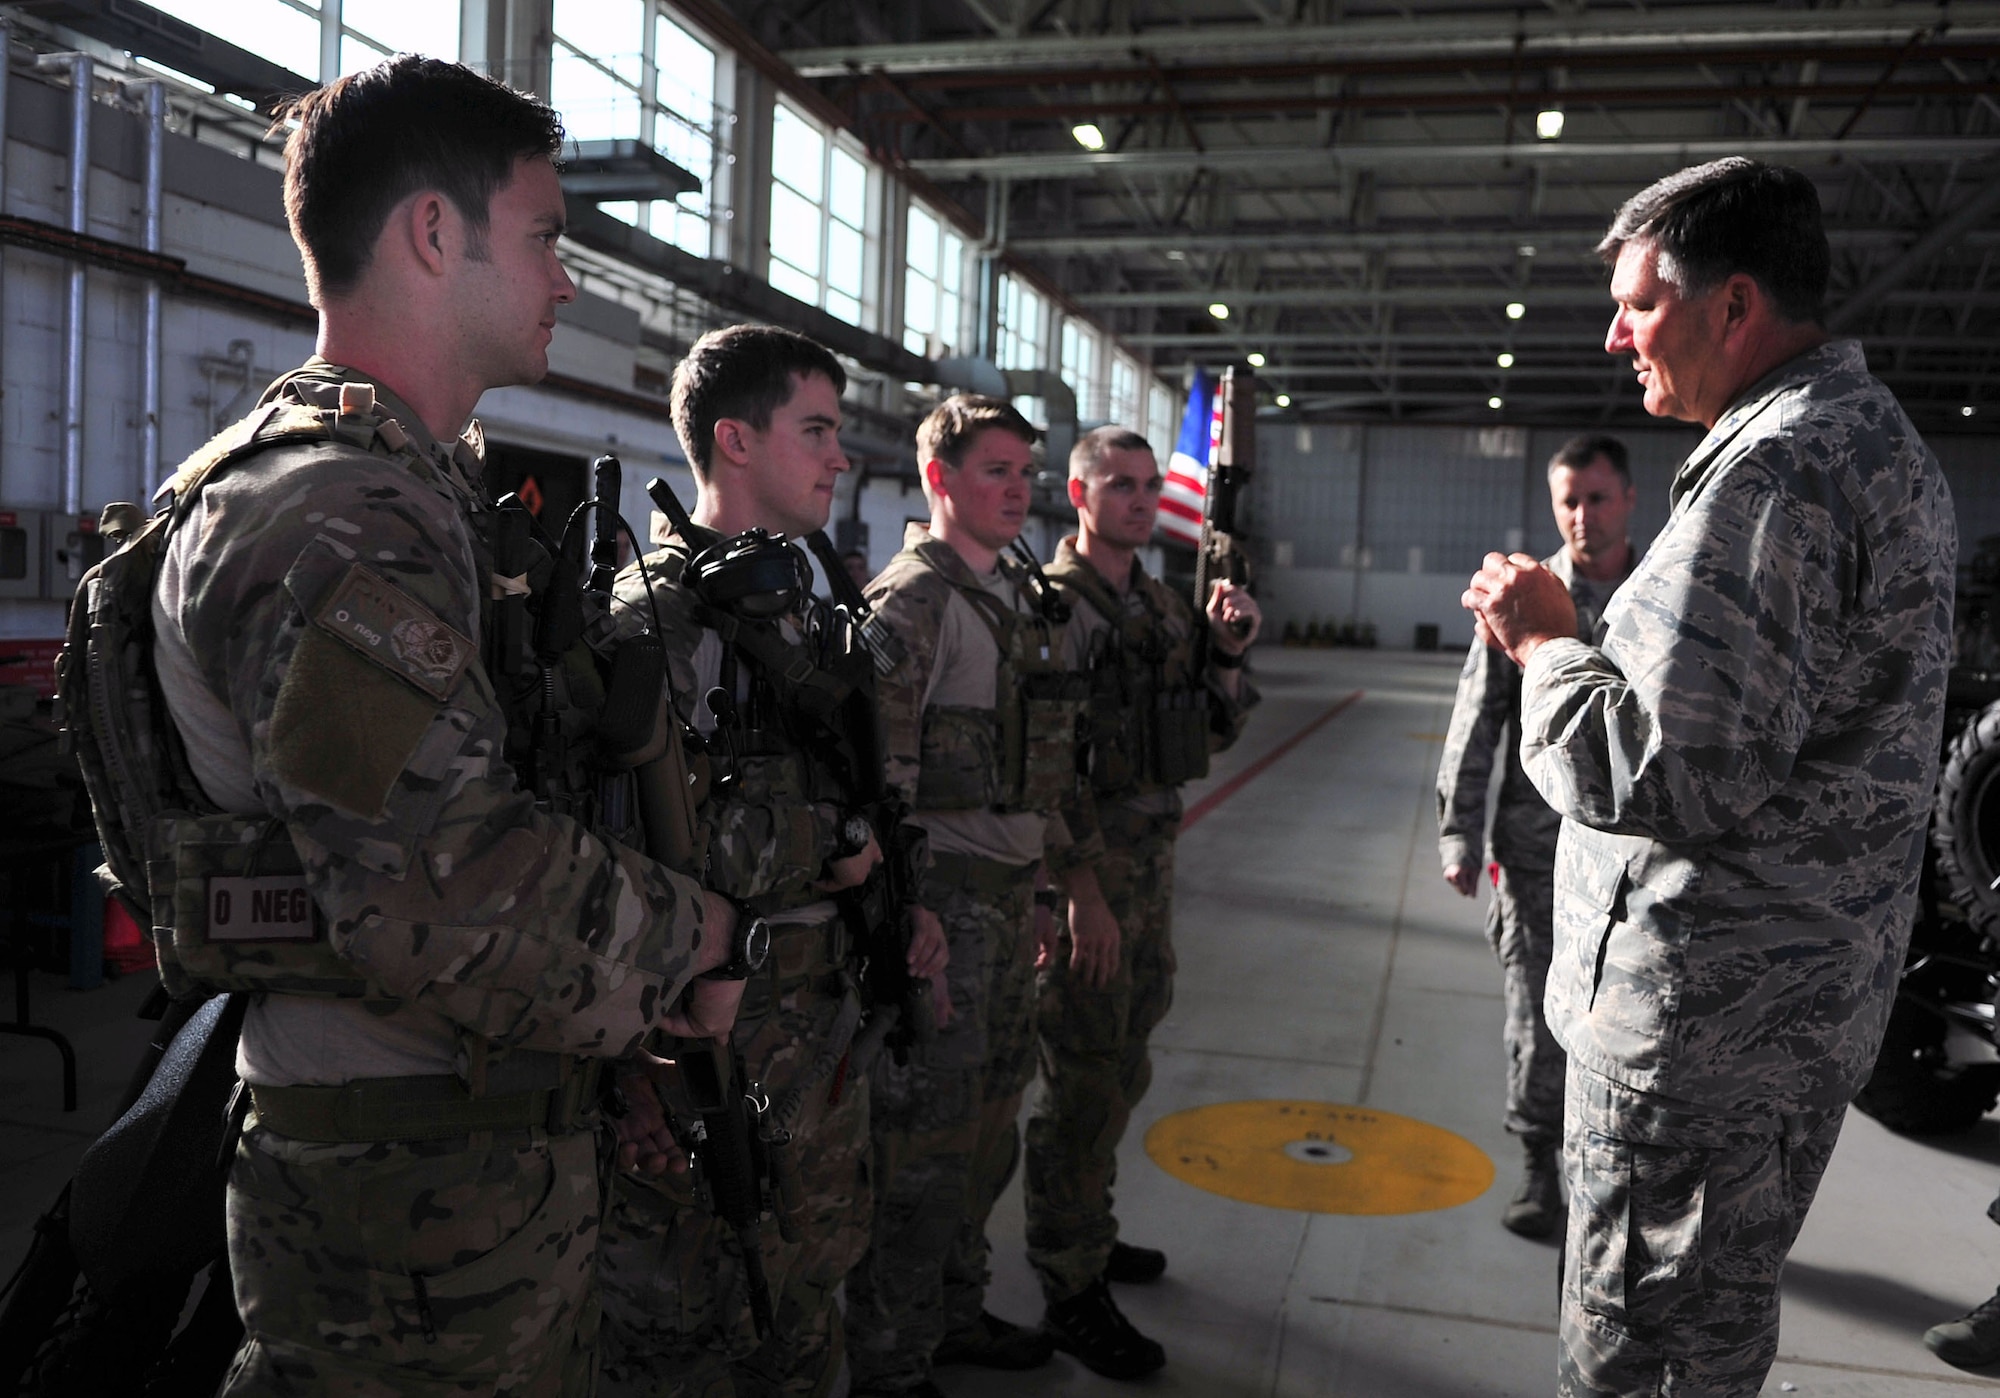 Lt. Gen Bradley A. Heithold, right, Air Force Special Operations Command commander, speaks with Air Commandos from the 321st Special Tactics Squadron, Oct. 27, 2014, on RAF Mildenhall, England. Heithold visited Air Commandos at various units to discuss the AFSOC mission to as ensure morale is at its highest. (U.S. Air Force photo by Senior Airman Christine Griffiths)
